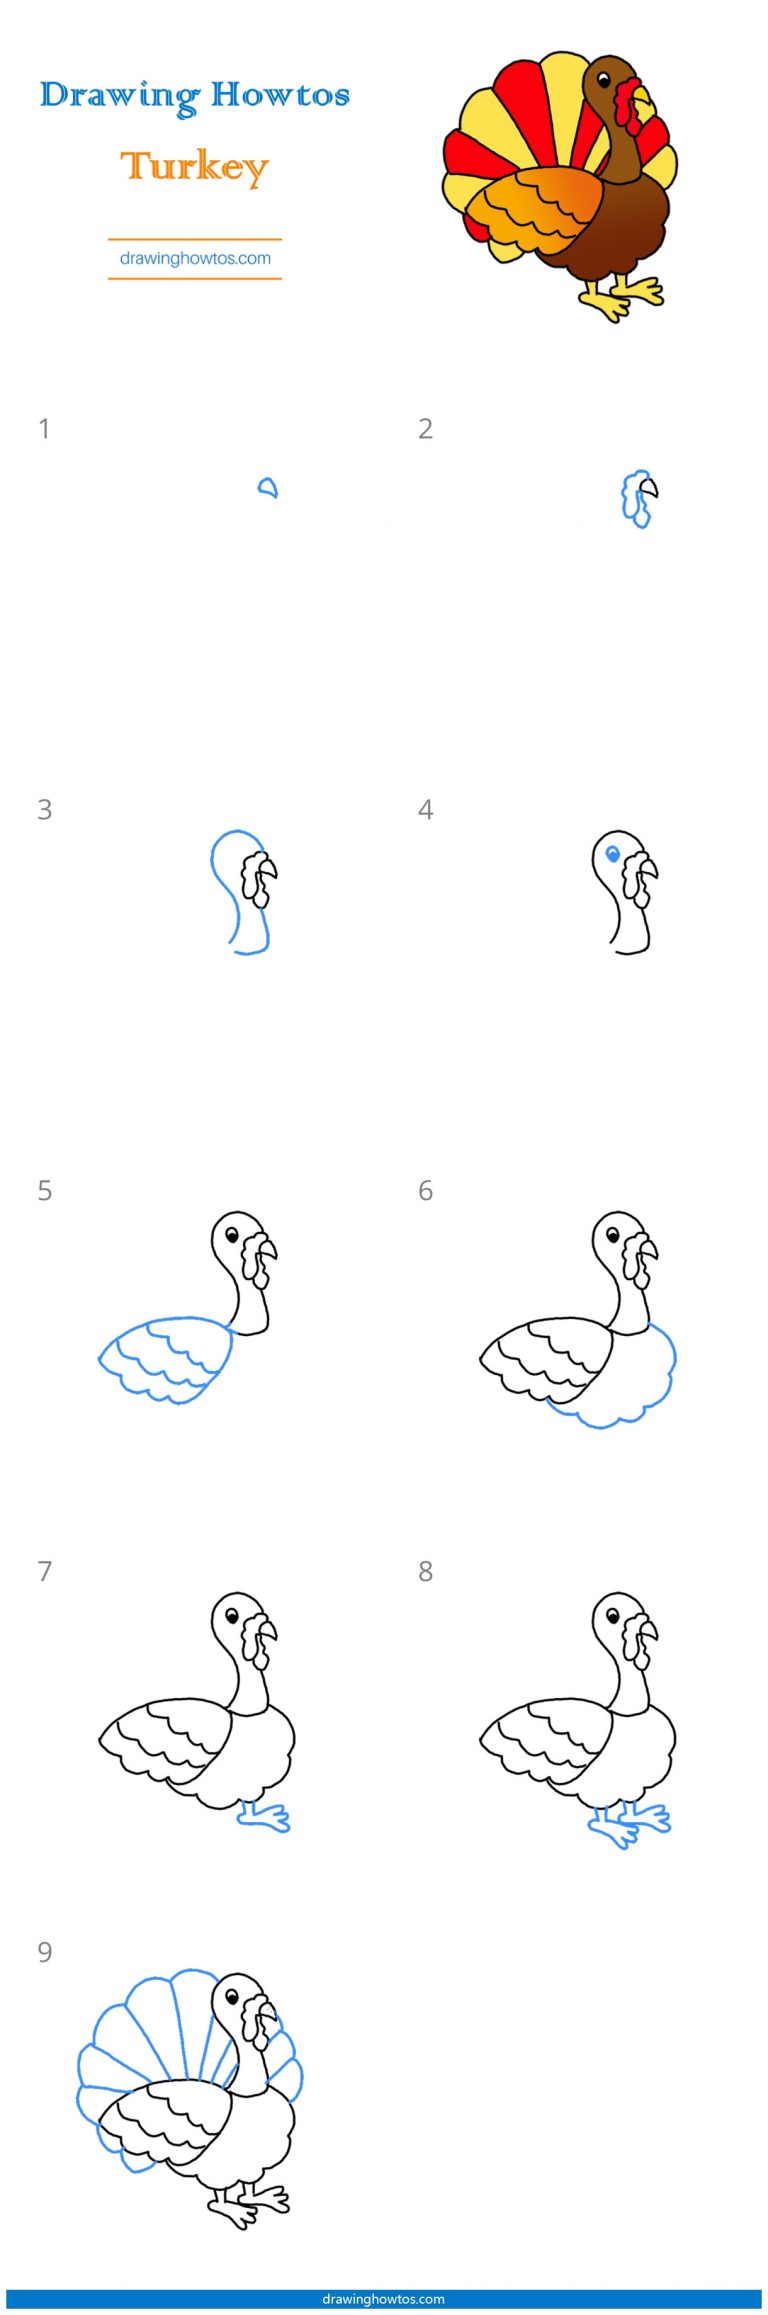 How to Draw a Turkey - Step by Step Easy Drawing Guides - Drawing Howtos